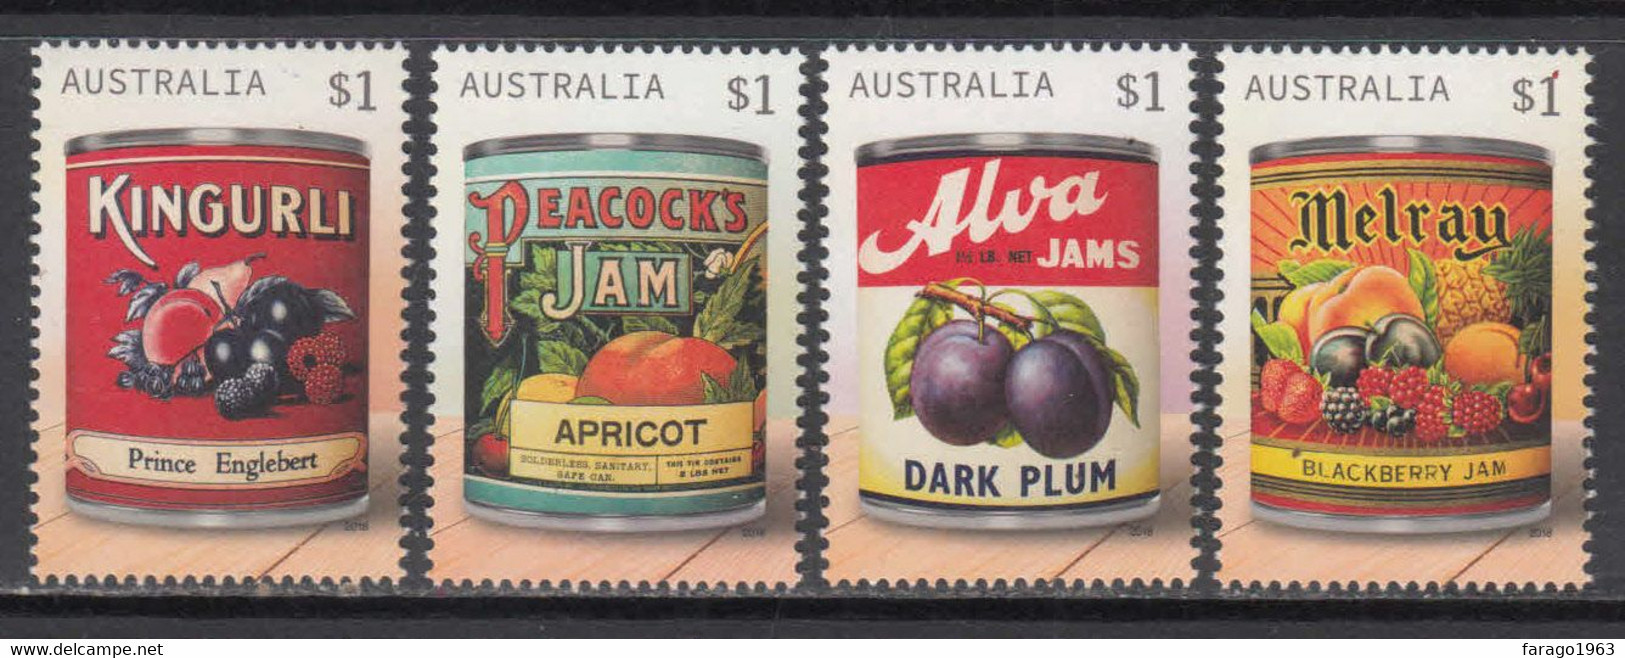 2018 Australia Jam Can Labels Advertising Complete Set Of 4 MNH @ BELOW FACE VALUE - Mint Stamps